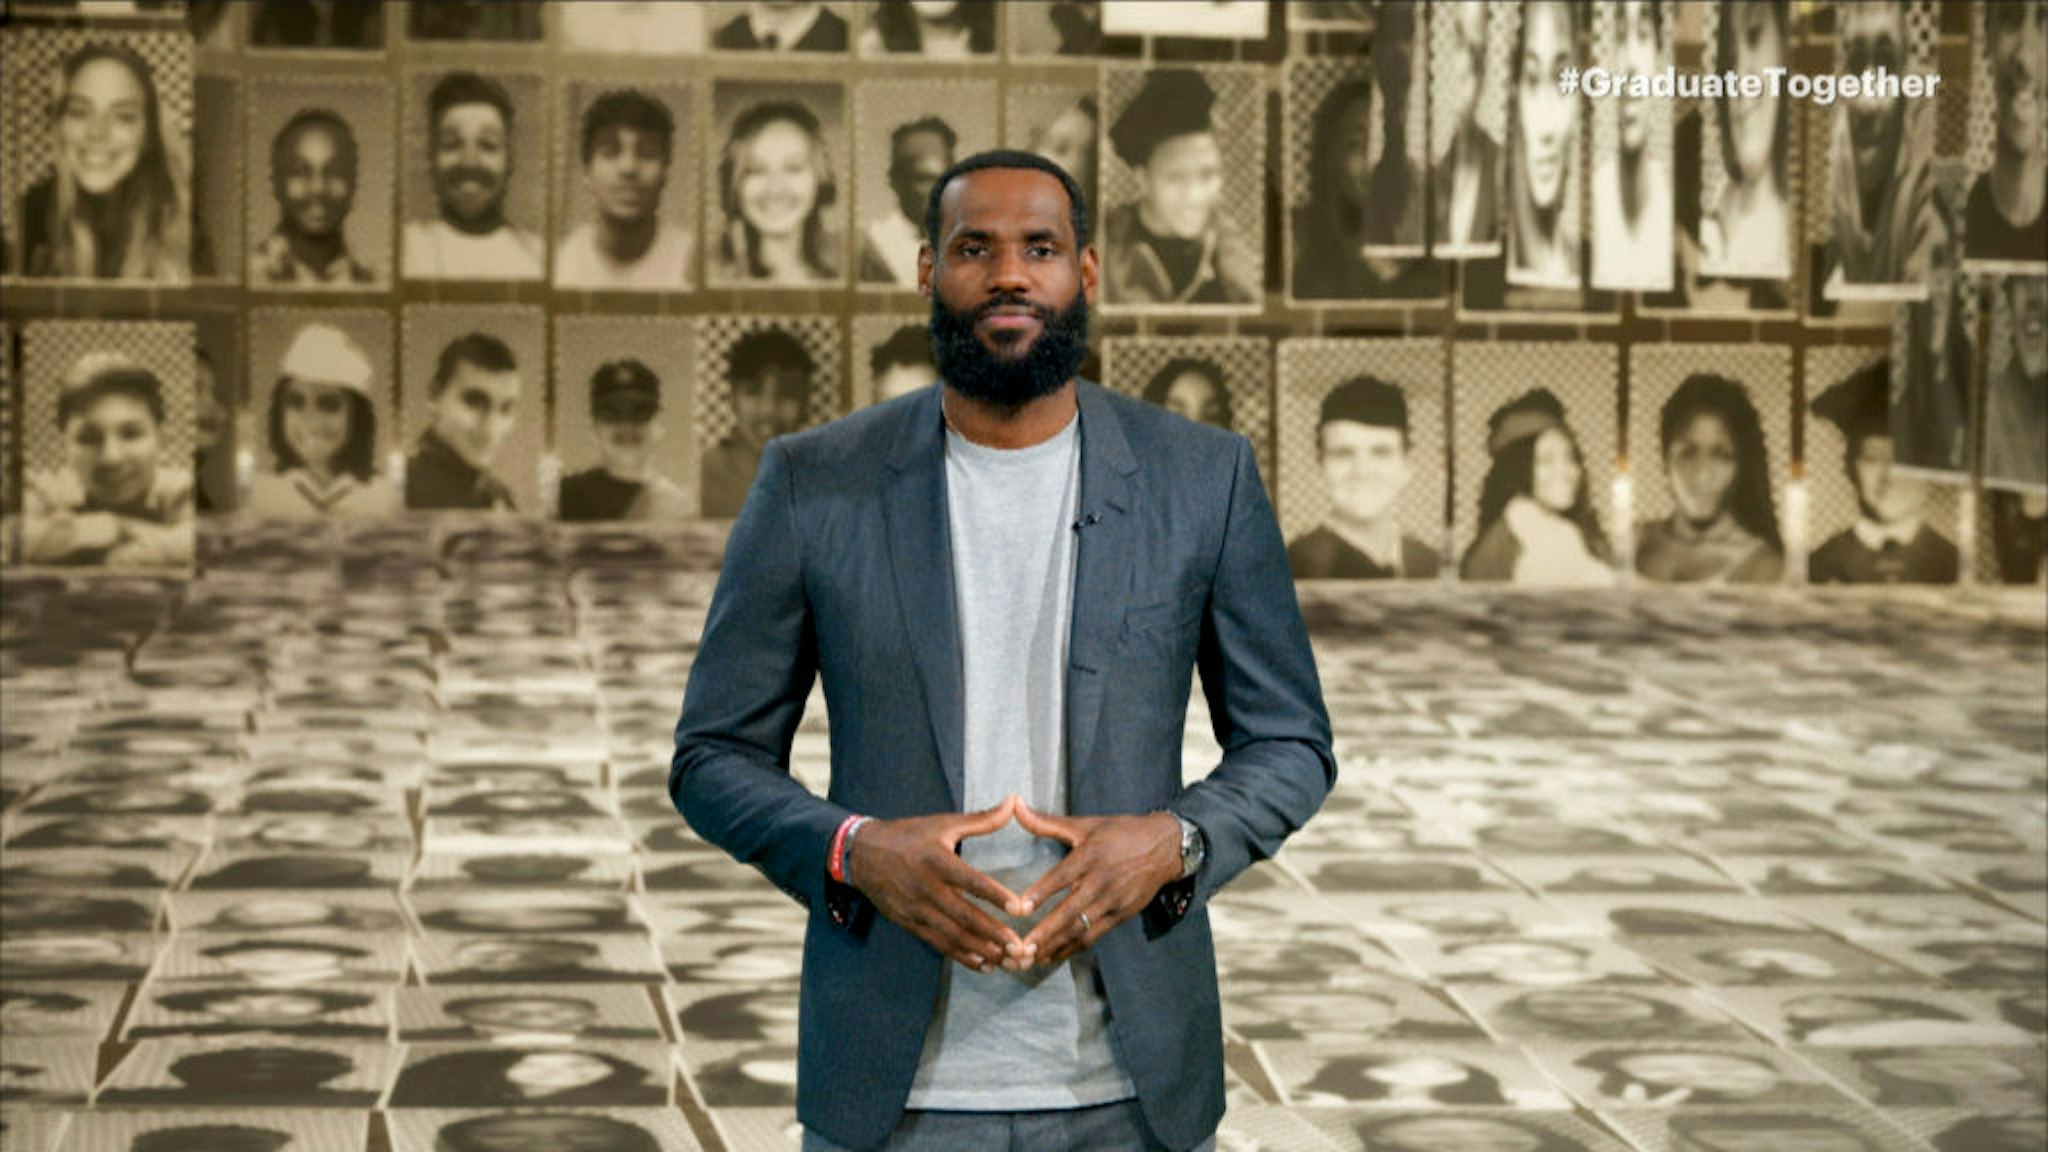 MAY 16: In this screengrab, LeBron James speaks during Graduate Together: America Honors the High School Class of 2020 on May 16, 2020. (Photo by Getty Images/Getty Images for EIF &amp; XQ)